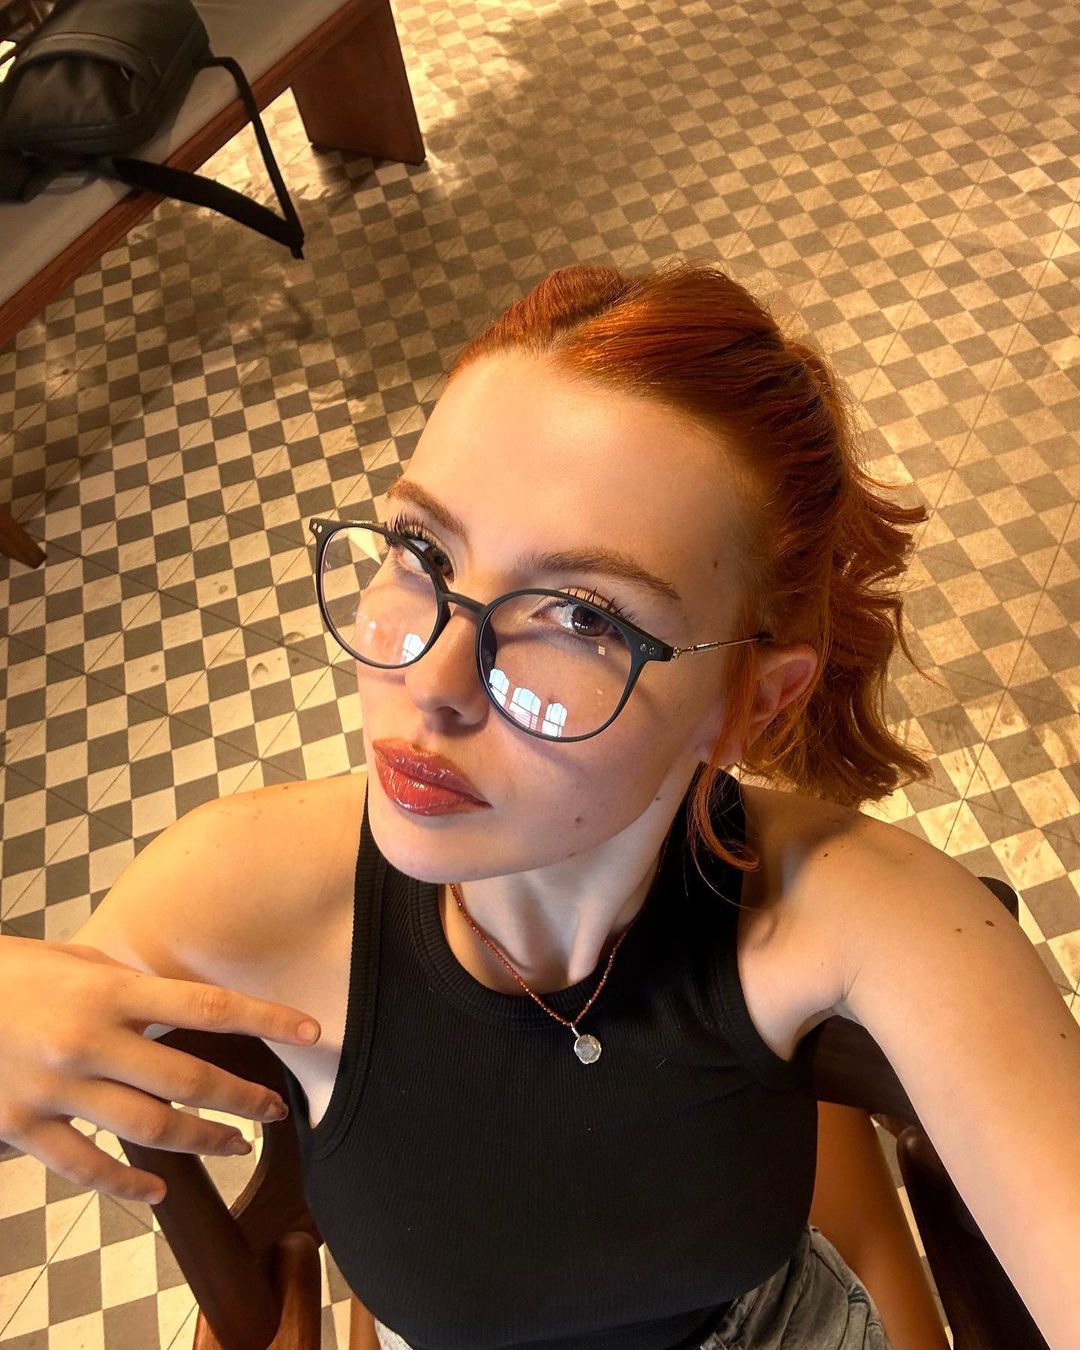 A person with red hair and glasses seated in a classic setting with geometric floor tiles.